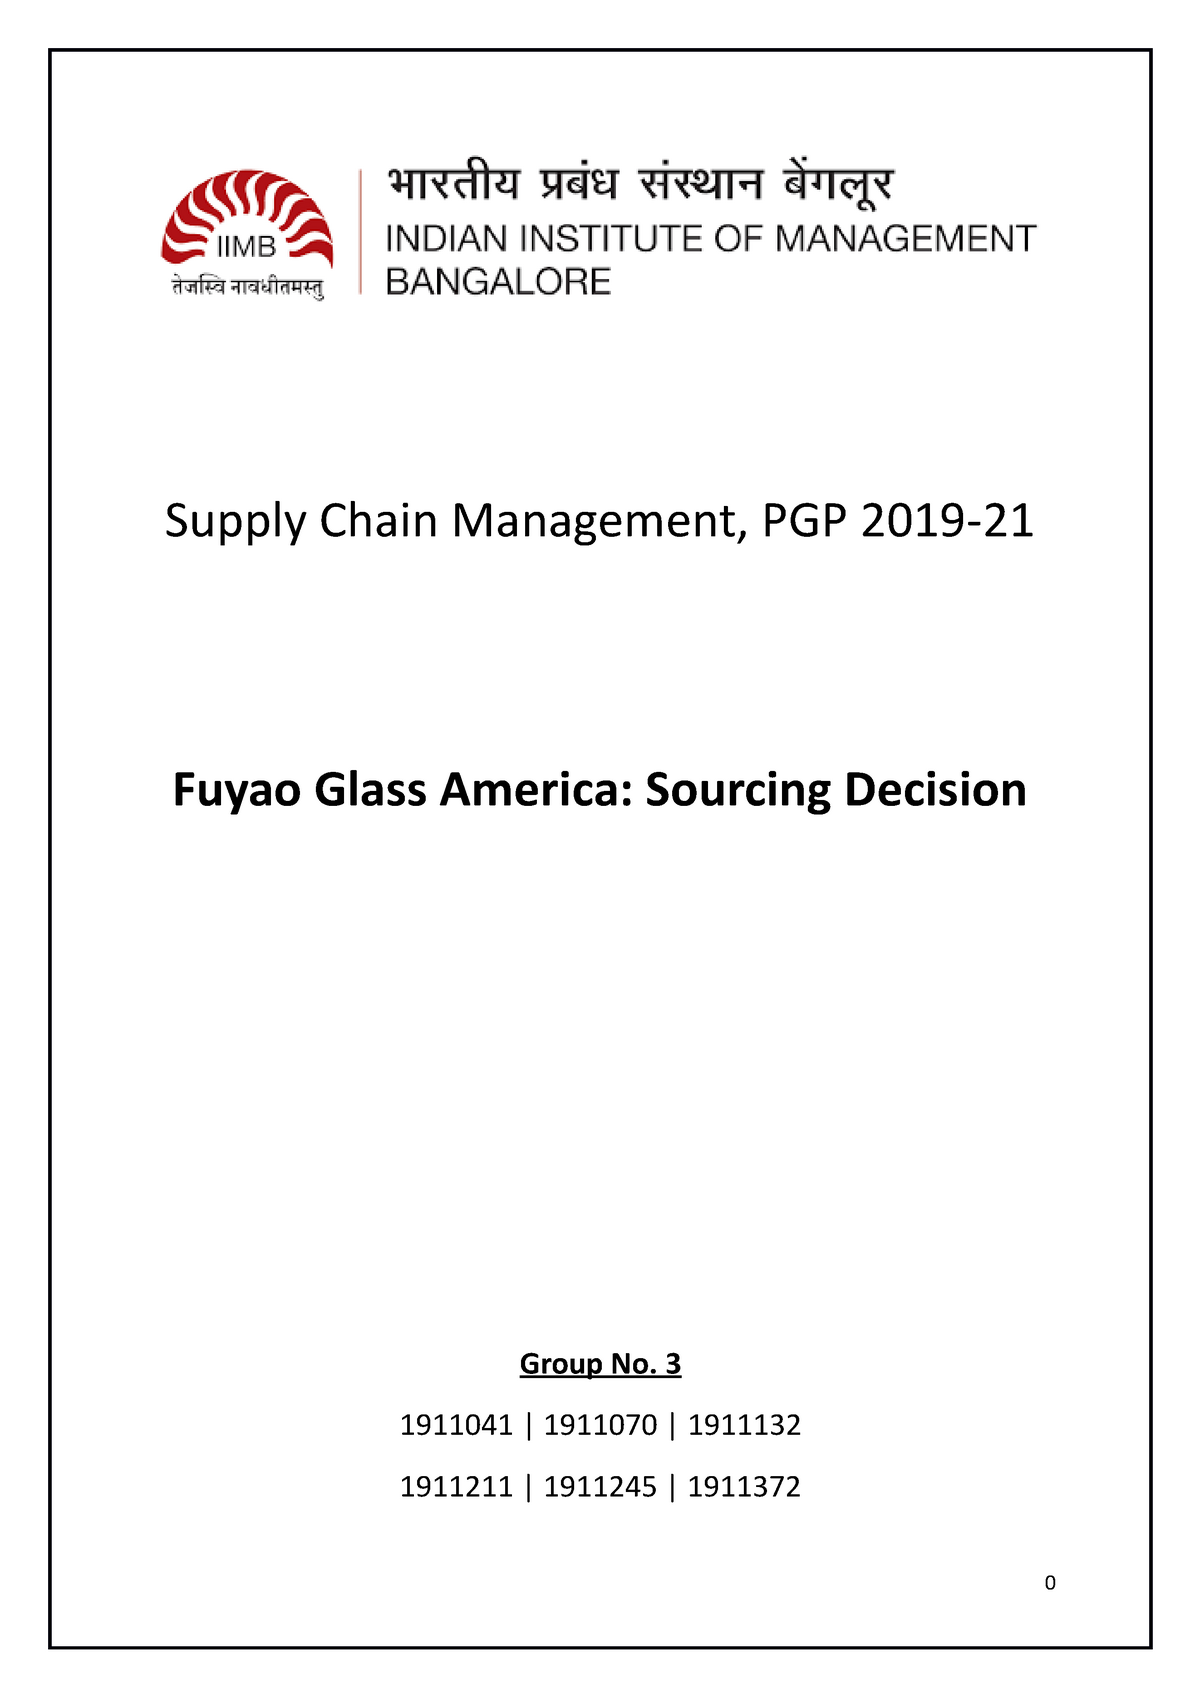 fuyao glass america sourcing decision case study solution